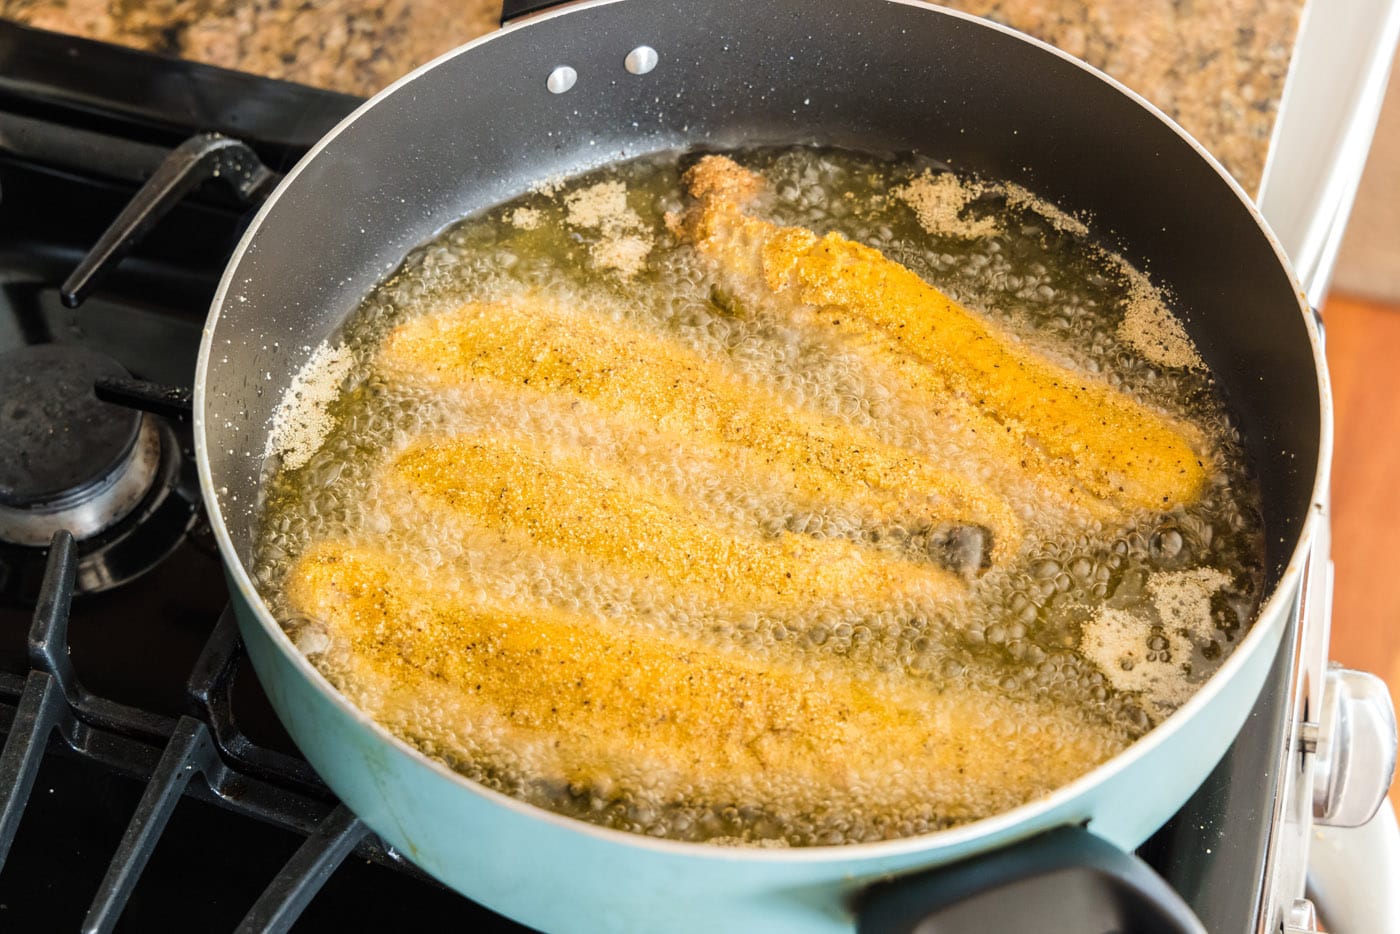 whiting fish frying in oil